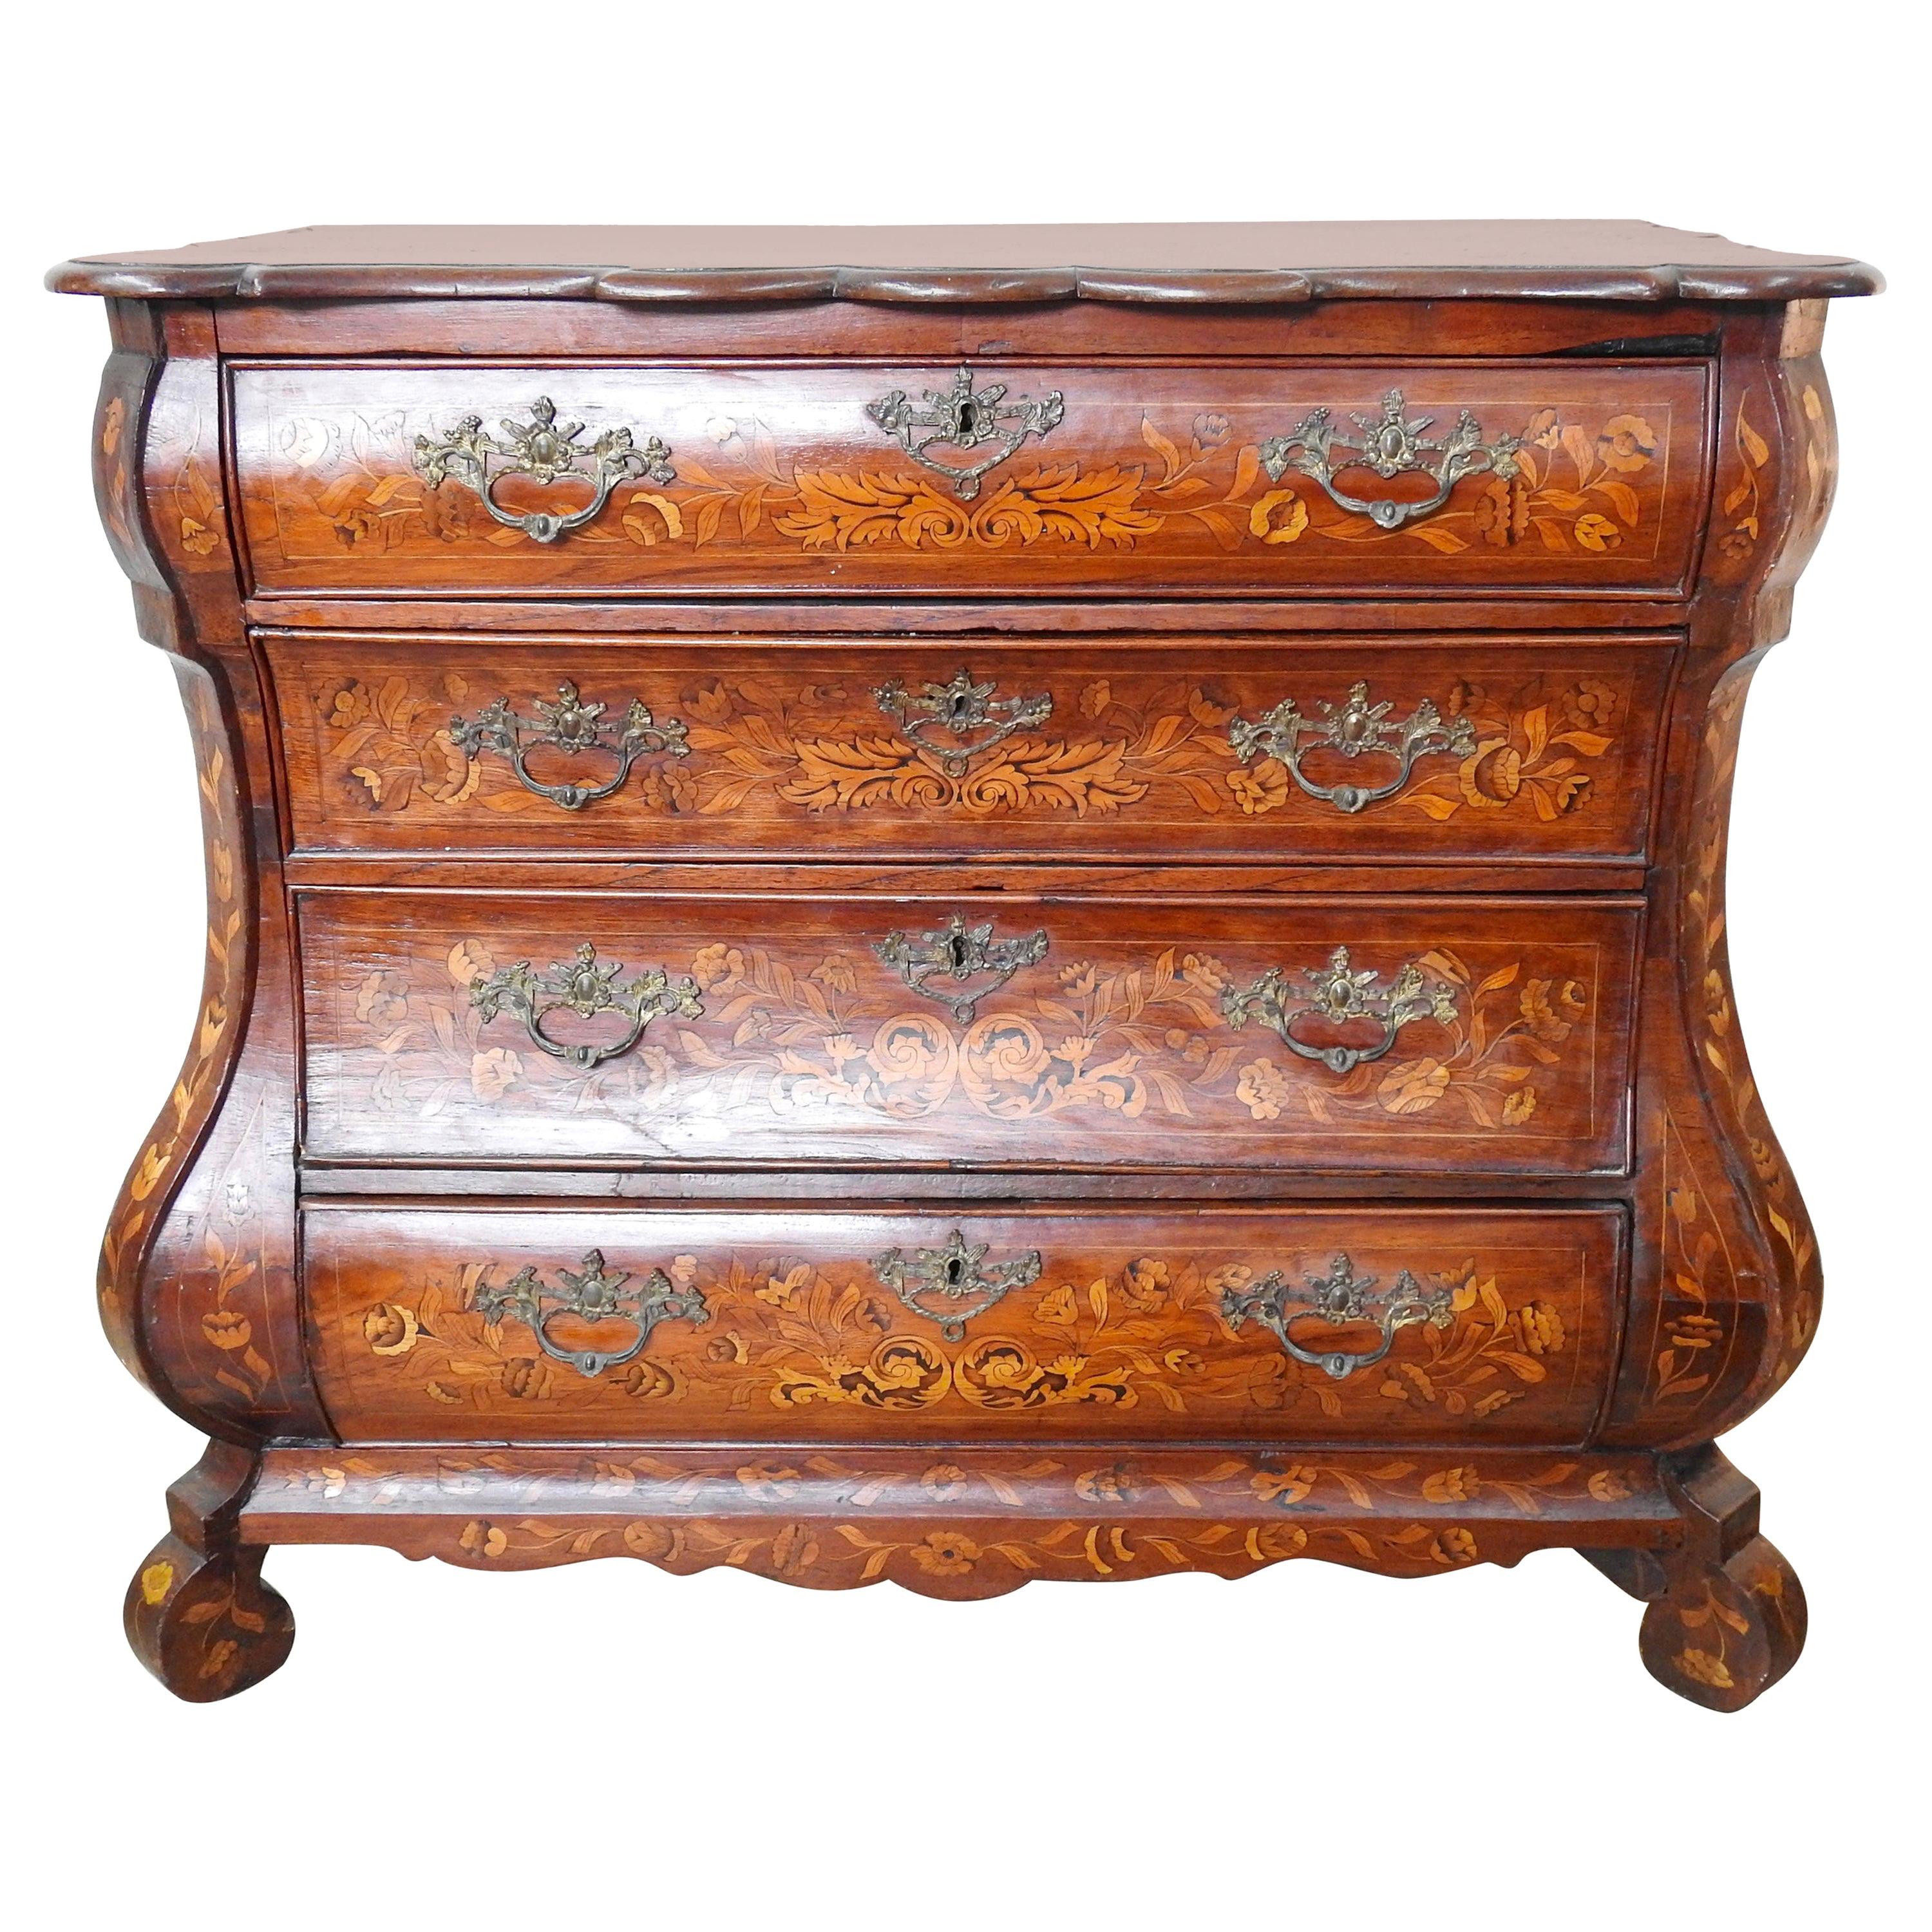 Dutch Walnut and Marquetry Bombé-front Commode, Mid-18th Century For Sale